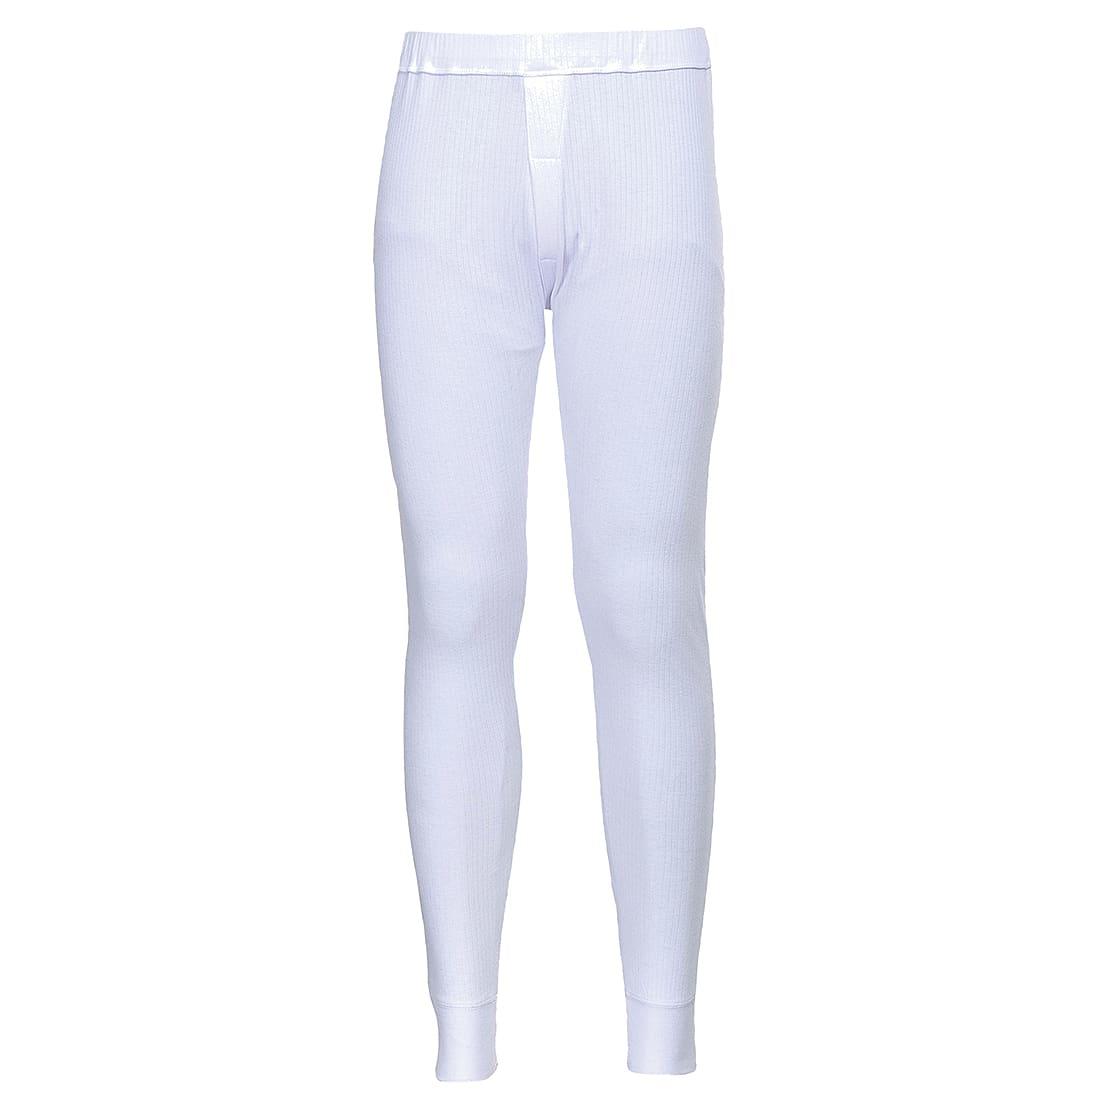 Portwest Thermal Trousers in White (Product Code: B121)